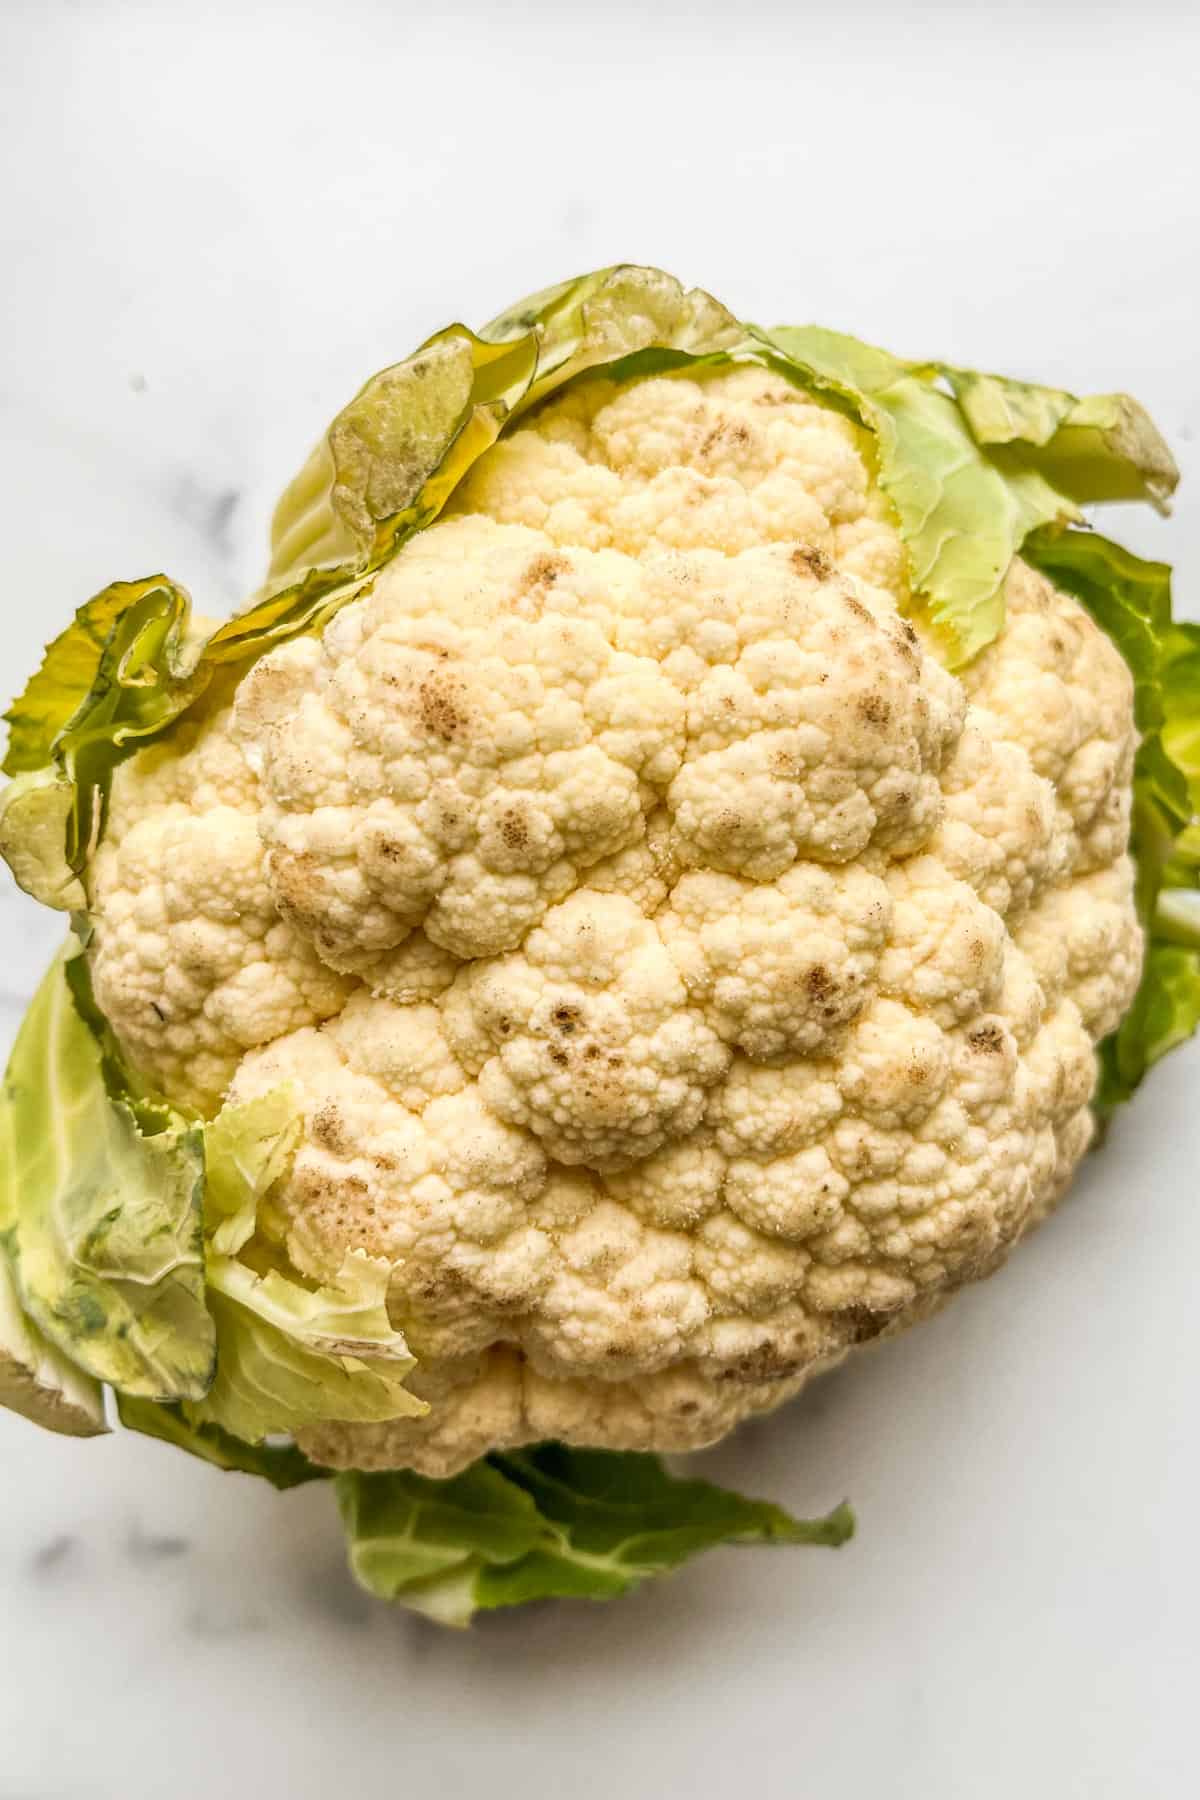 Cauliflower that has gone bad with mold and dark spots.